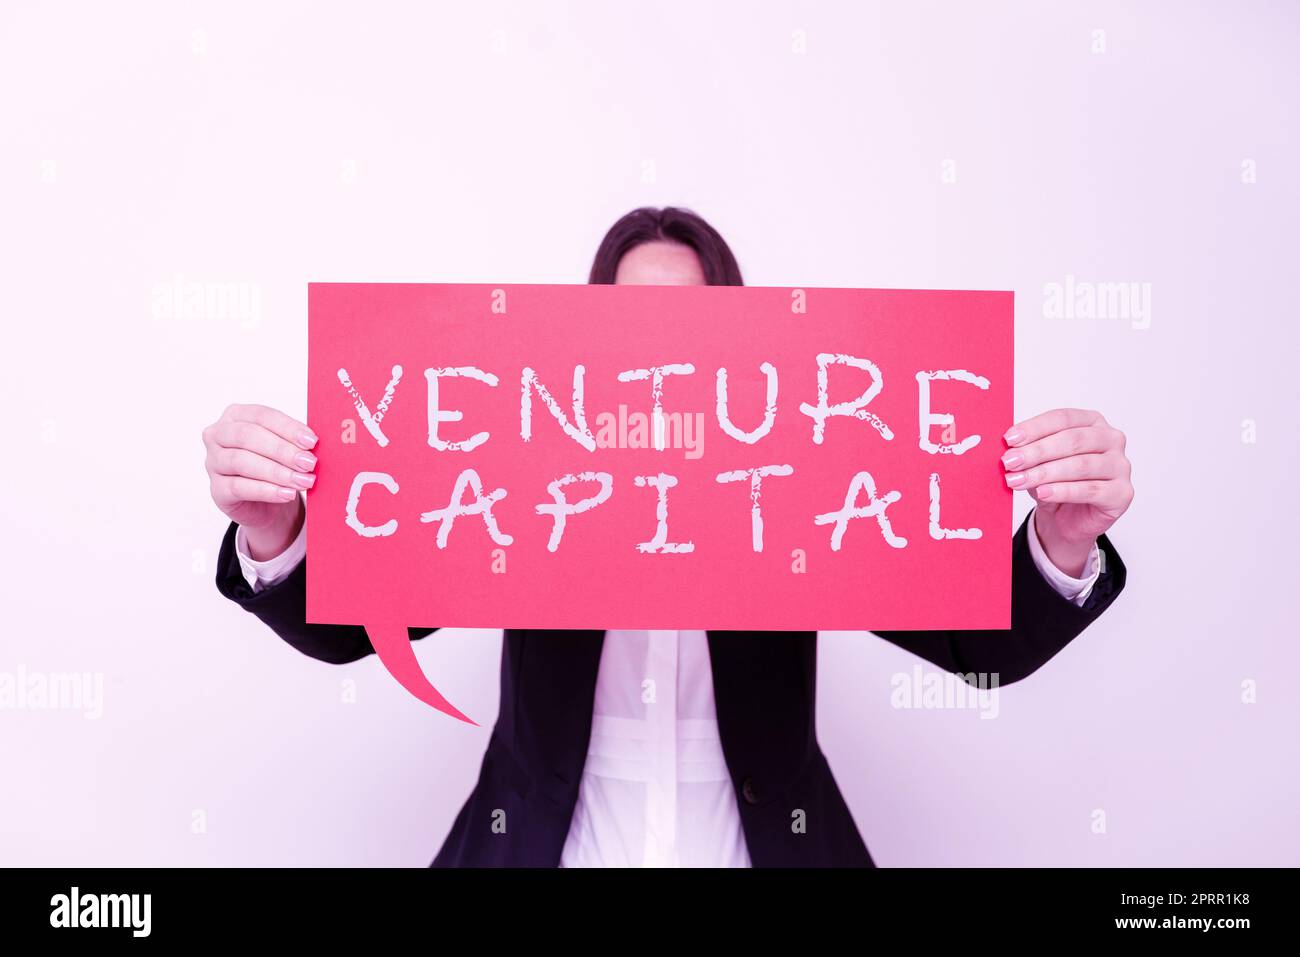 Writing displaying text Venture Capitalfinancing provided by firms to small early stage ones. Word for financing provided by firms to small early stage ones Stock Photo